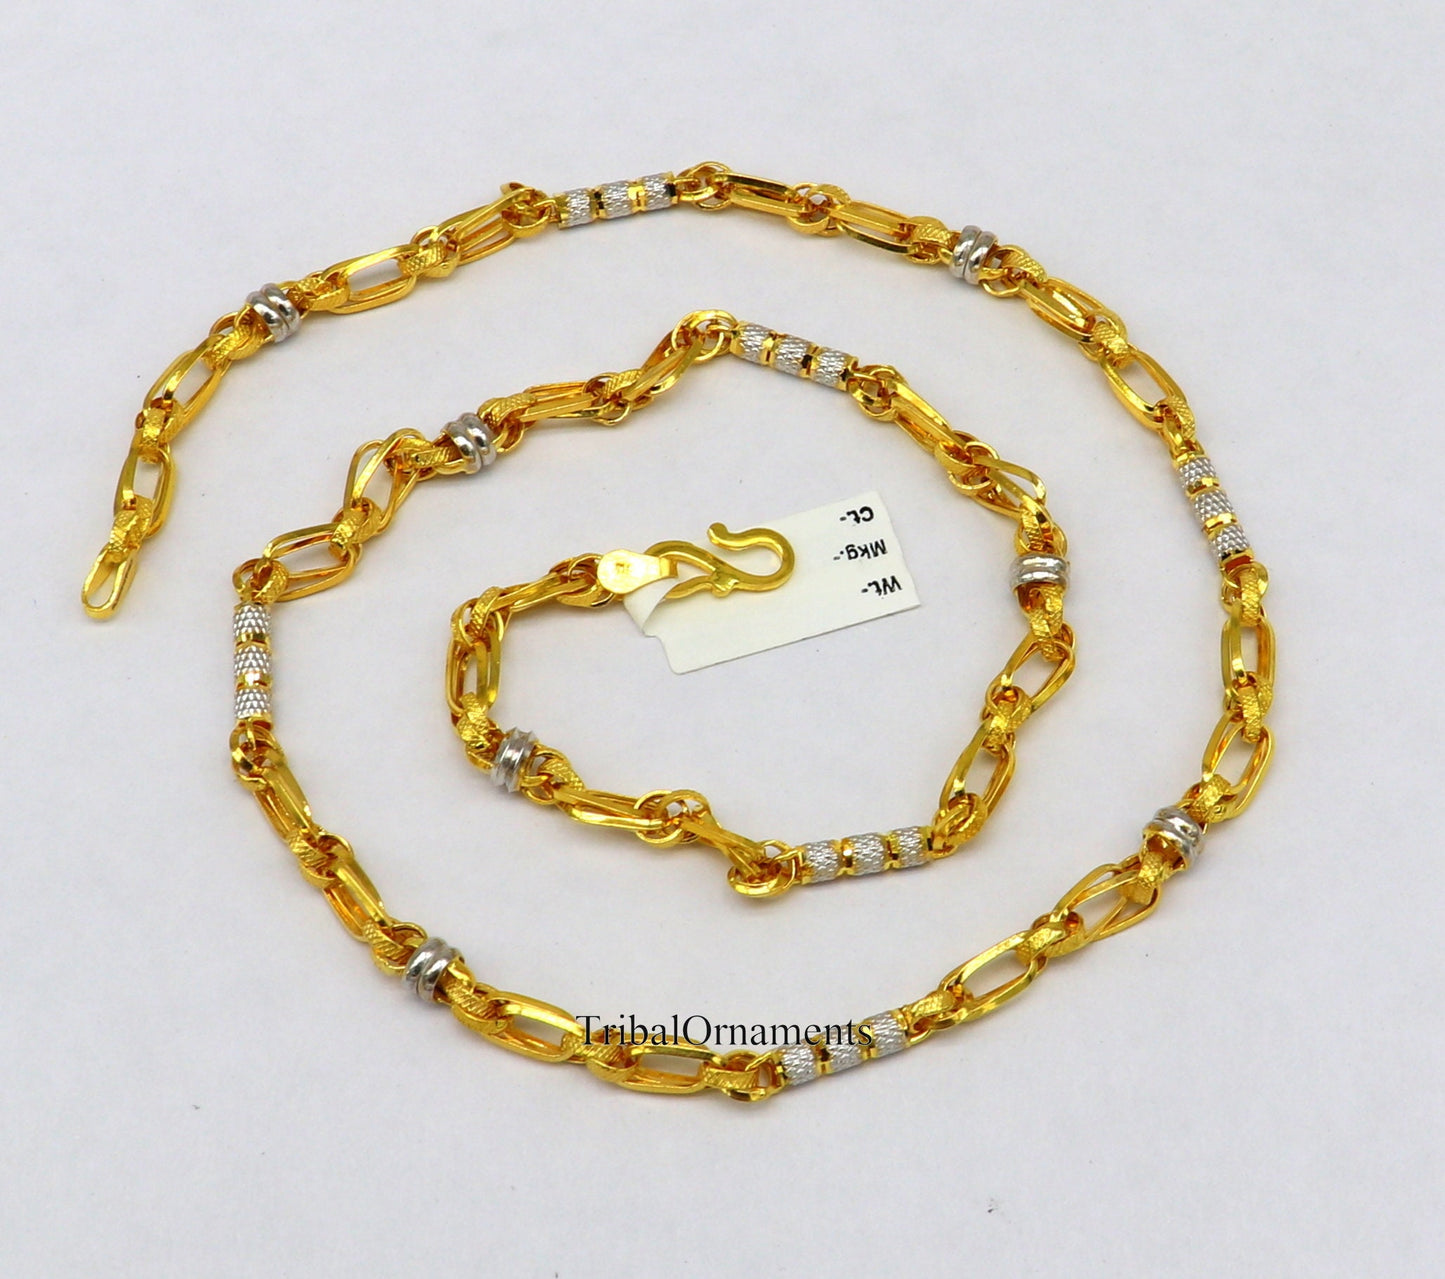 22kt yellow gold handmade gorgeous Customized necklace chain, best gift for unsex, royal India custom jewelry ch234 - TRIBAL ORNAMENTS